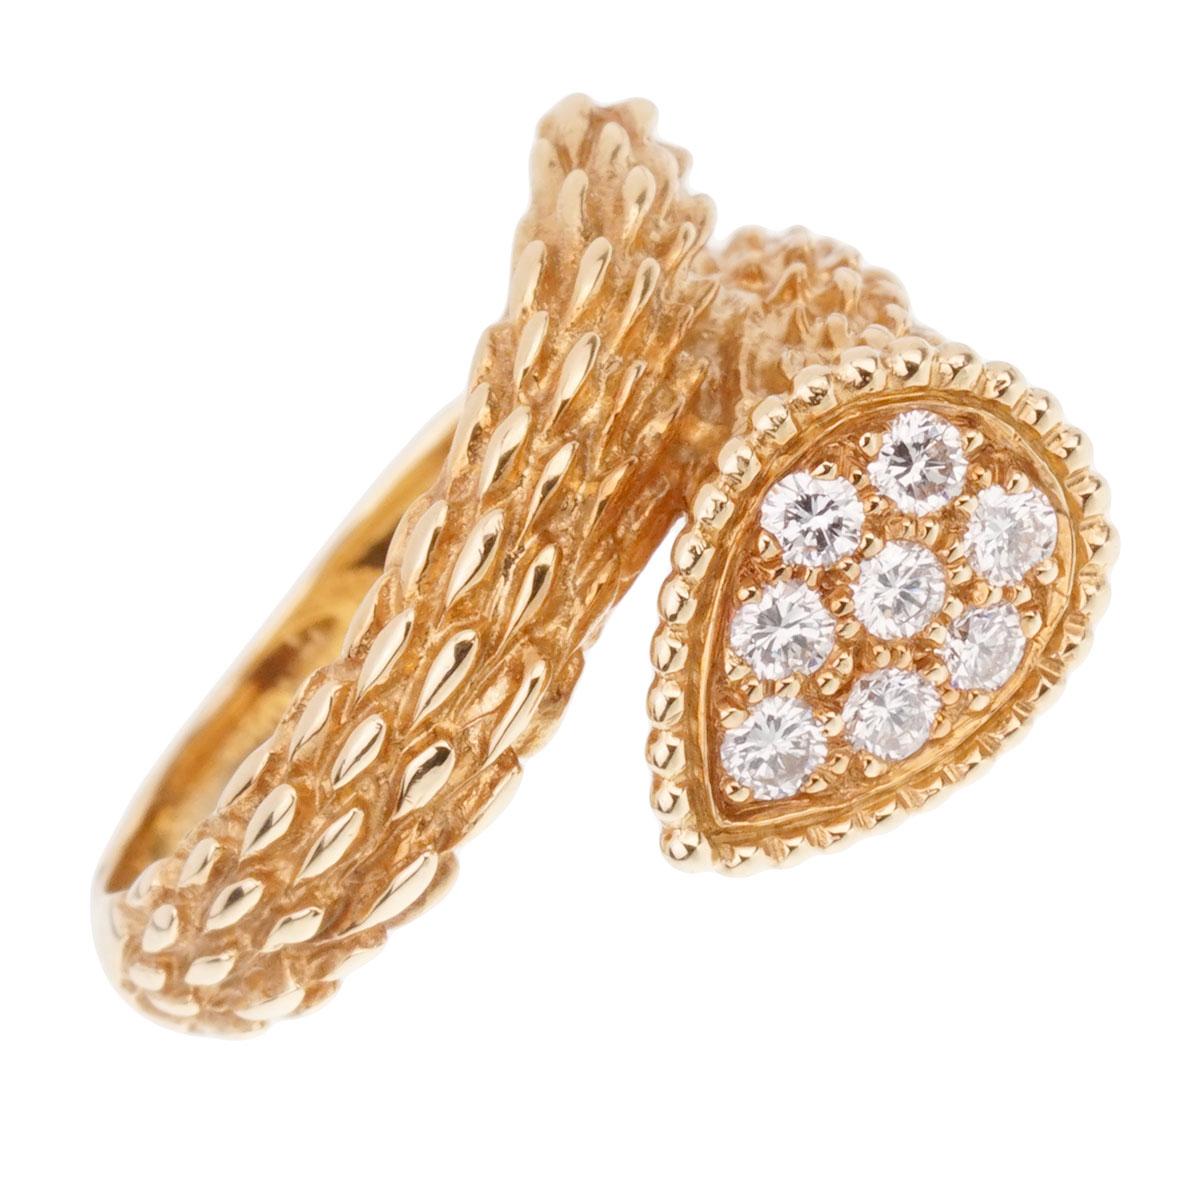 An iconic Boucheron diamond yellow gold ring from the Serpent Boheme collection crafted in 18k yellow gold set with 8 round brilliant cut diamonds.

Size 7 1/4 resizeable